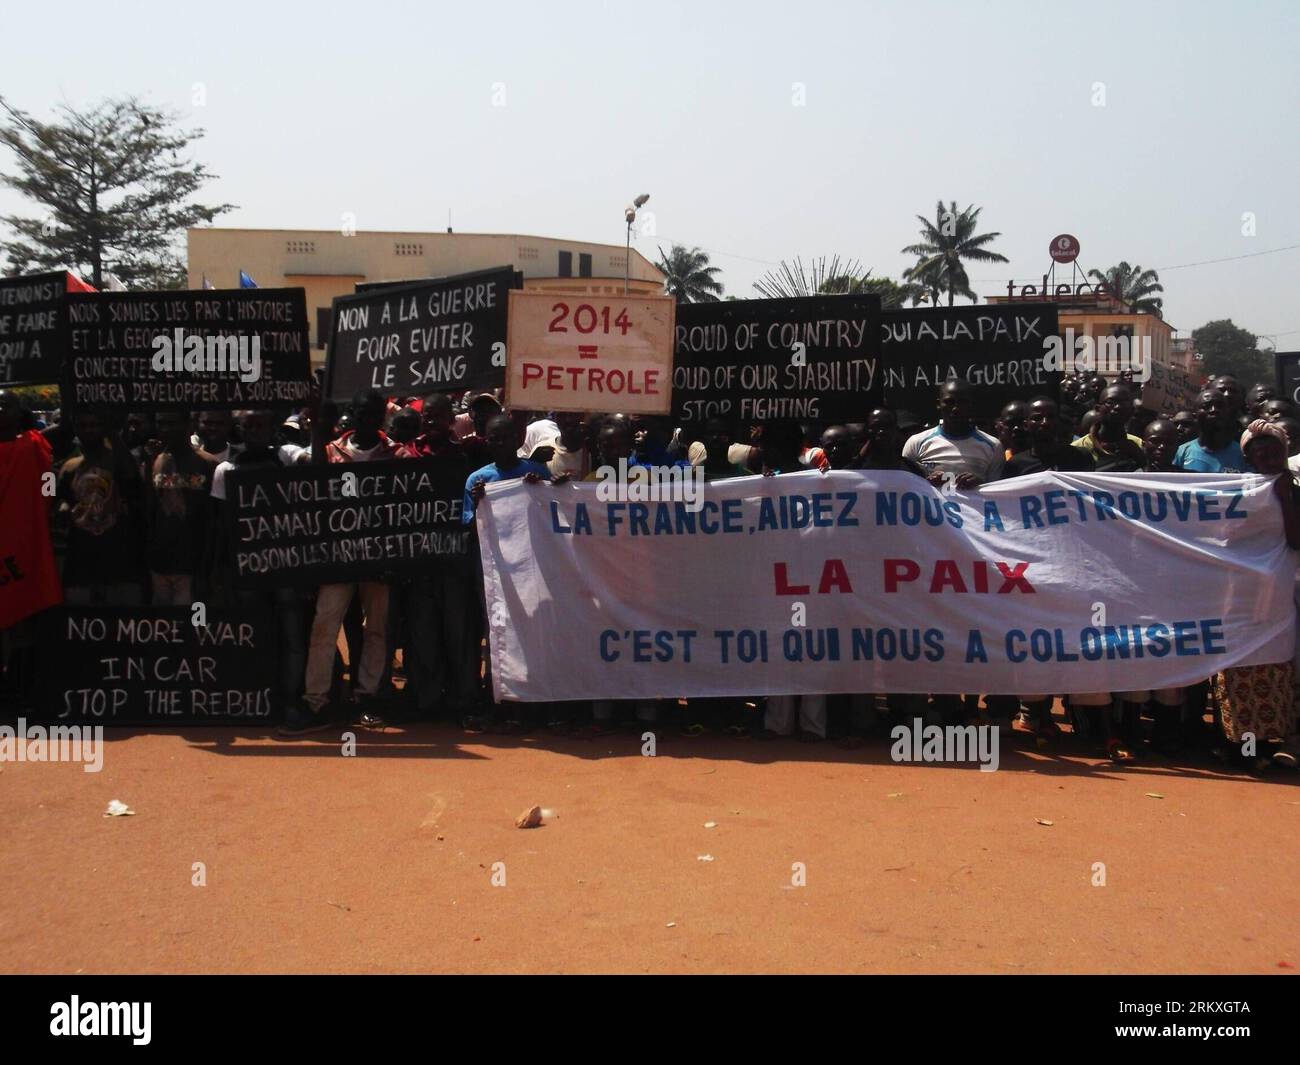 Bildnummer: 58959098  Datum: 26.12.2012  Copyright: imago/Xinhua BANGUI, (Xinhua) -- Local residents stage a protest in front of the French Embassy to the Central African Republic (CAR) in Bangui, CAR, on Dec. 26, 2012. French Foreign Minister Luarent Fabius on Monday urged CAR officials and rebels to launch swift talks to stop heavy fighting and forge a coalition government. (Xinhua/Thierry Messongo) (lyx) CAR-FRANCE-CALL FOR TRUCE PUBLICATIONxNOTxINxCHN Demo Protest Zentralafrikanische Republik xdp x0x 2012 quer     58959098 Date 26 12 2012 Copyright Imago XINHUA Bangui XINHUA Local Resident Stock Photo